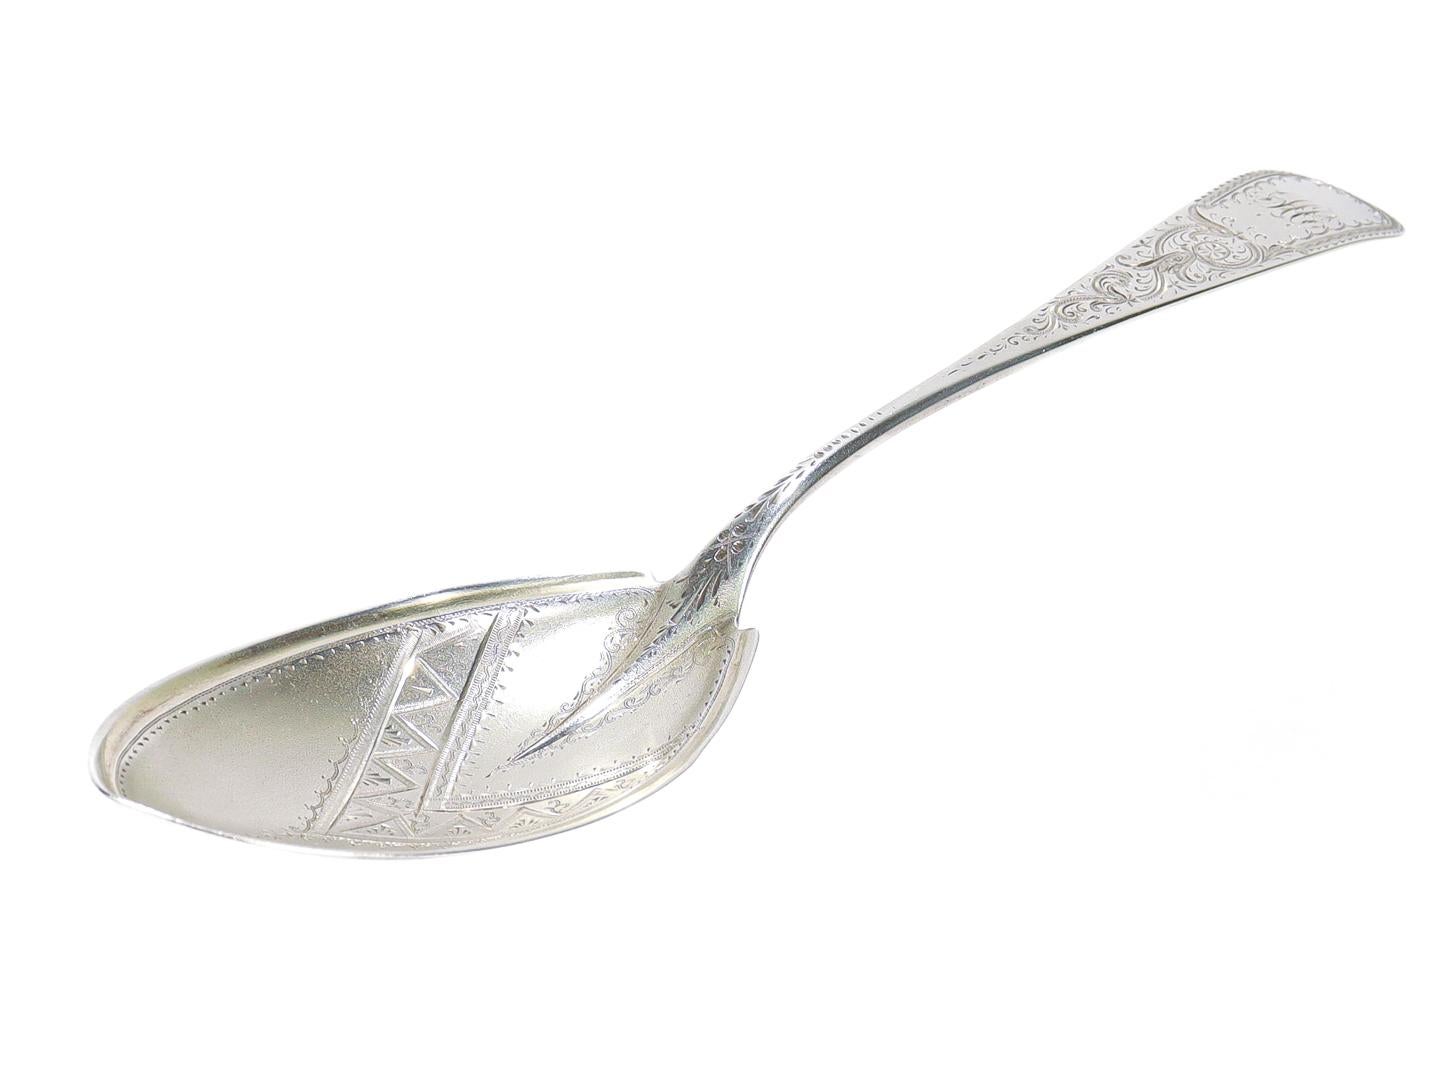 American Aesthetic Period R. & W. Wilson Brite Cut Sterling Silver Serving Spoon In Good Condition For Sale In Philadelphia, PA